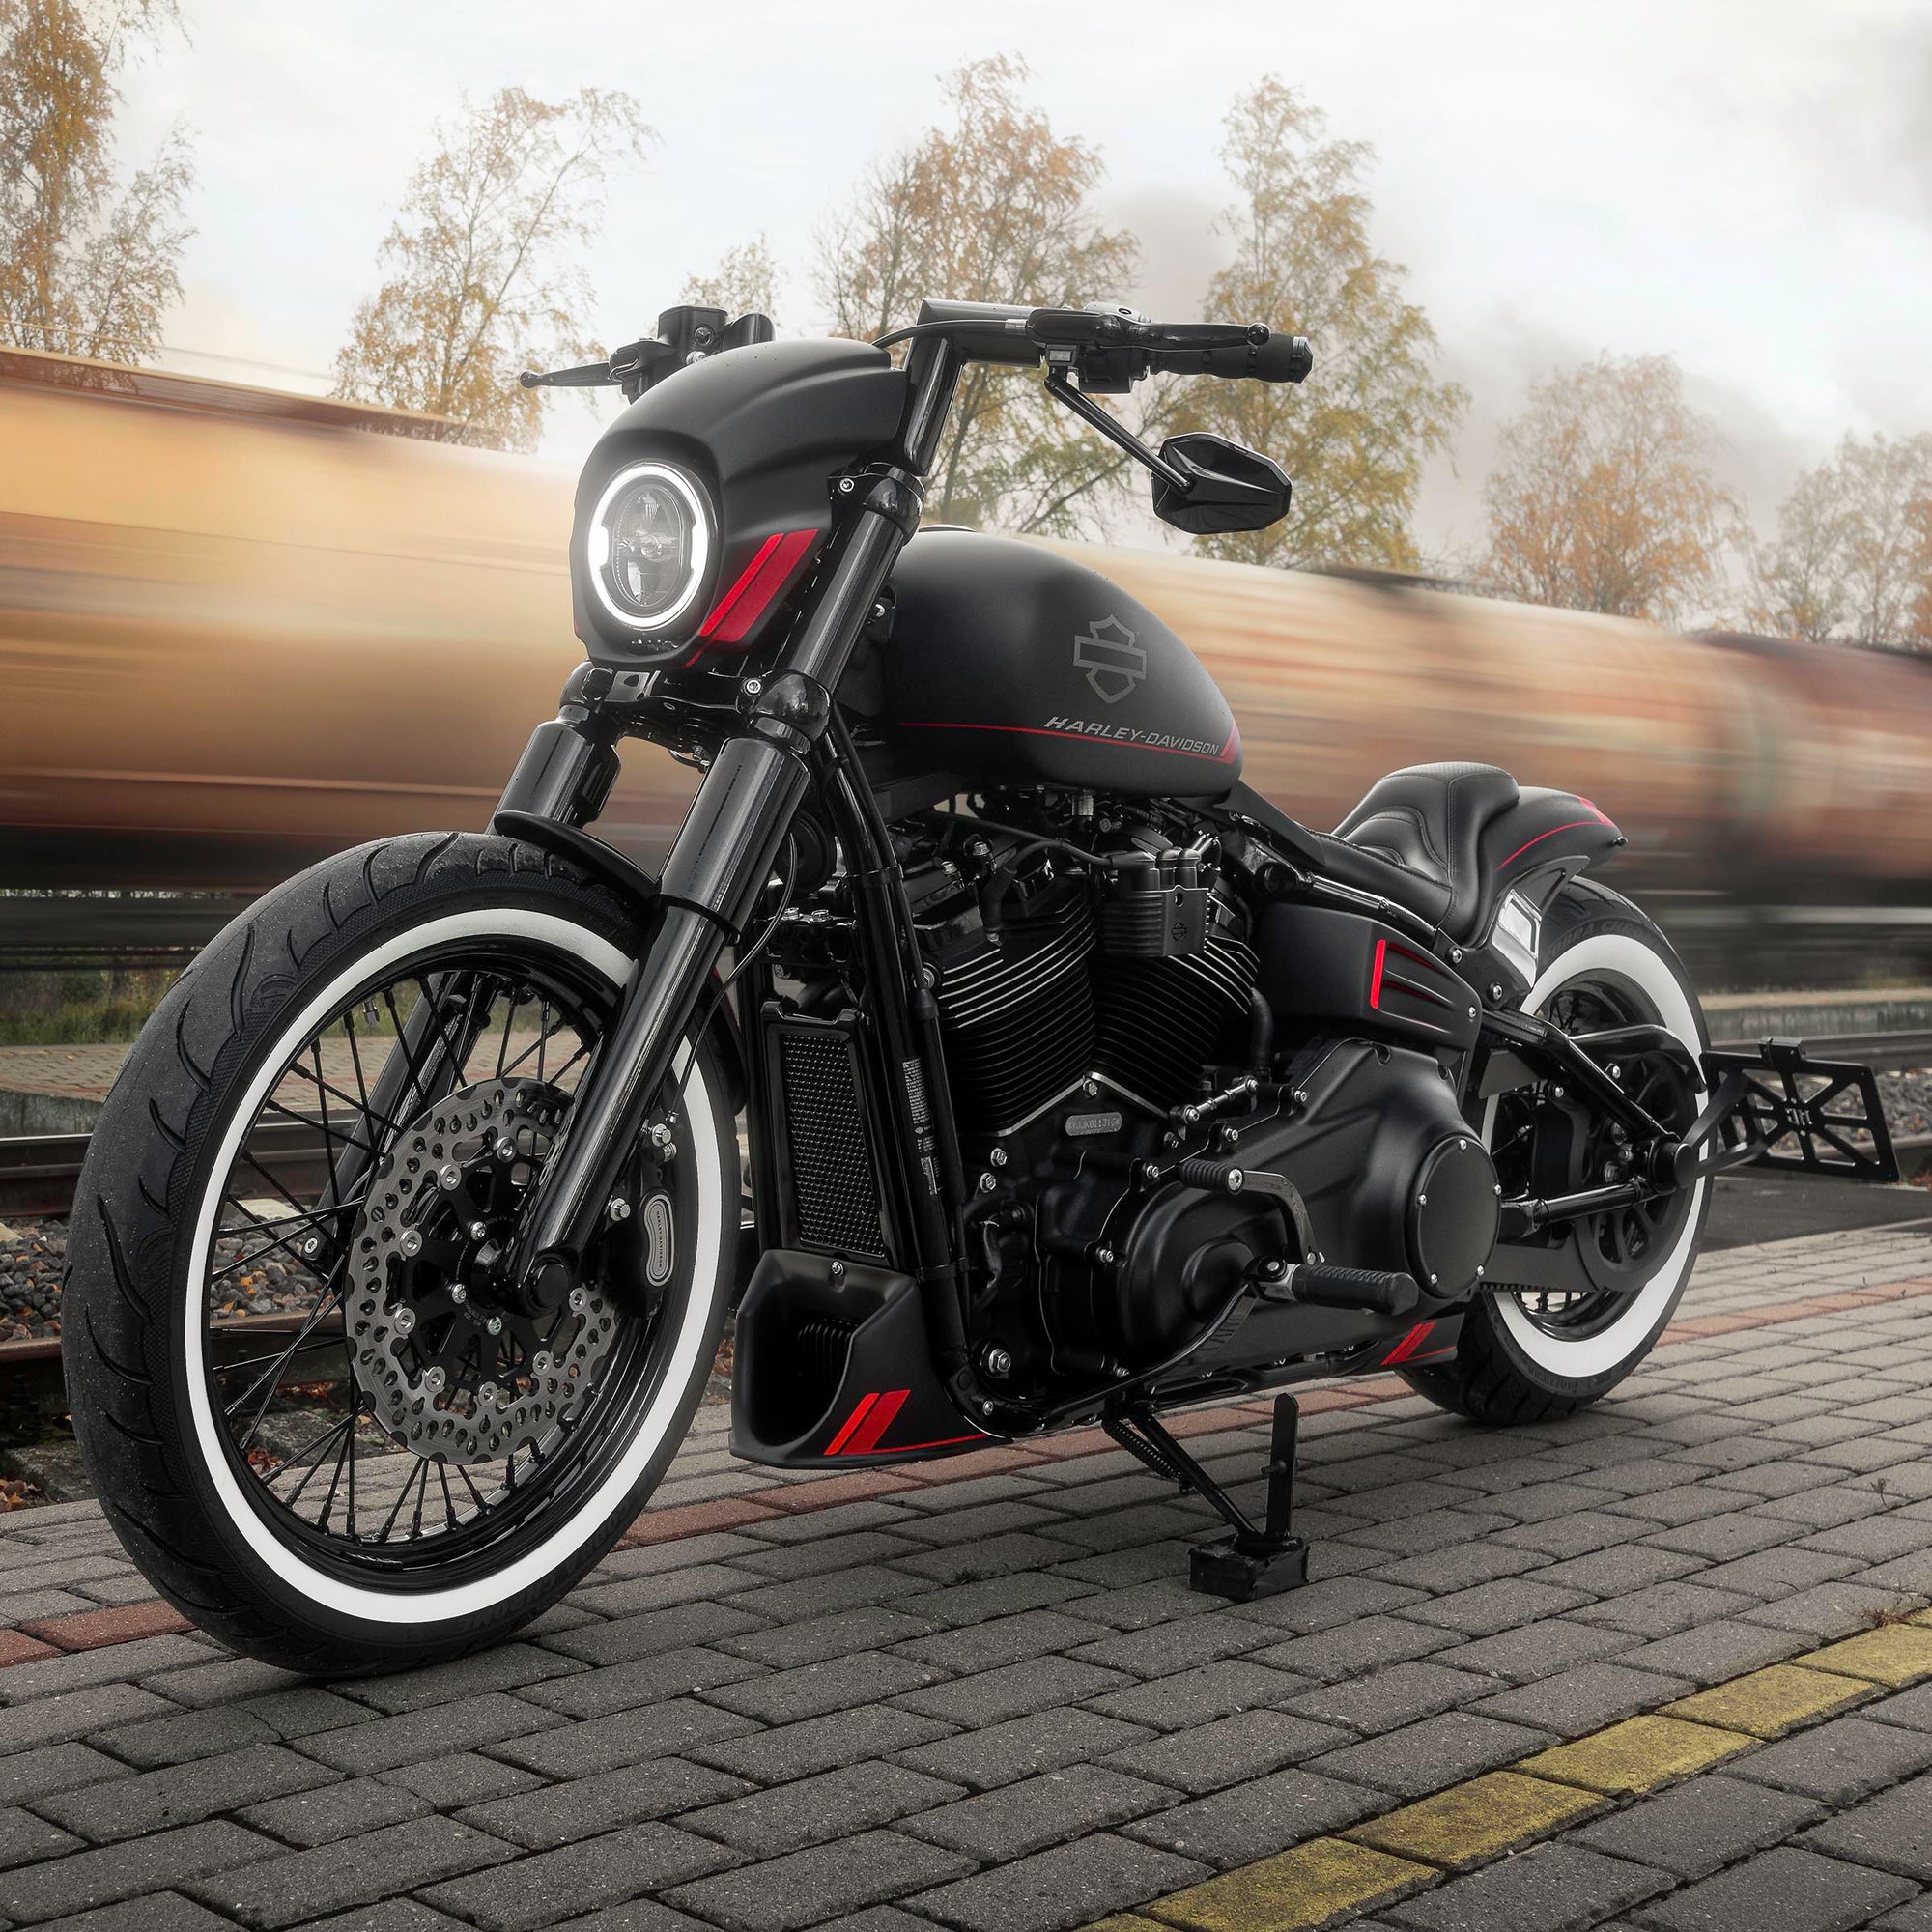 Modified Harley Davidson Street Bob motorcycle with Killer Custom parts from the side at a railway station